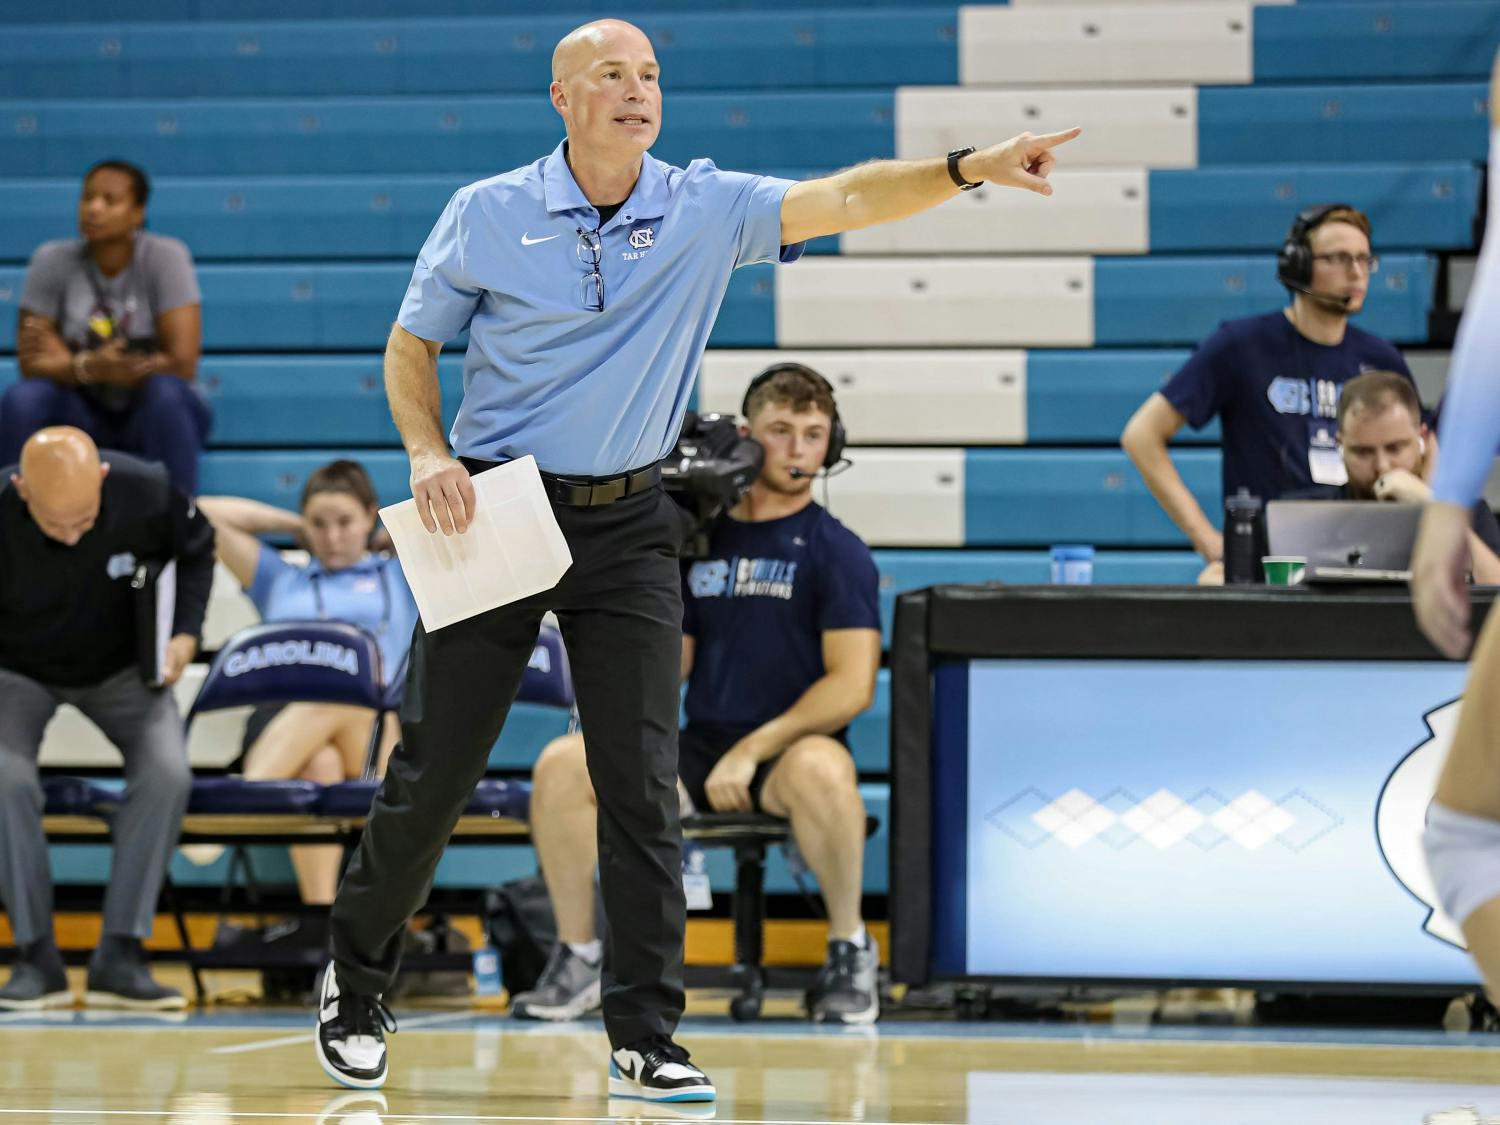 Mike Schall coaches from the sidelines of the UNC volleyball game against South Carolina in Carmichael Arena on Friday, Sept. 2, 2022. Schall was named the new head coach of the program on Wednesday, Feb. 15, 2023.
Photo Courtesy of Carolina Athletics.